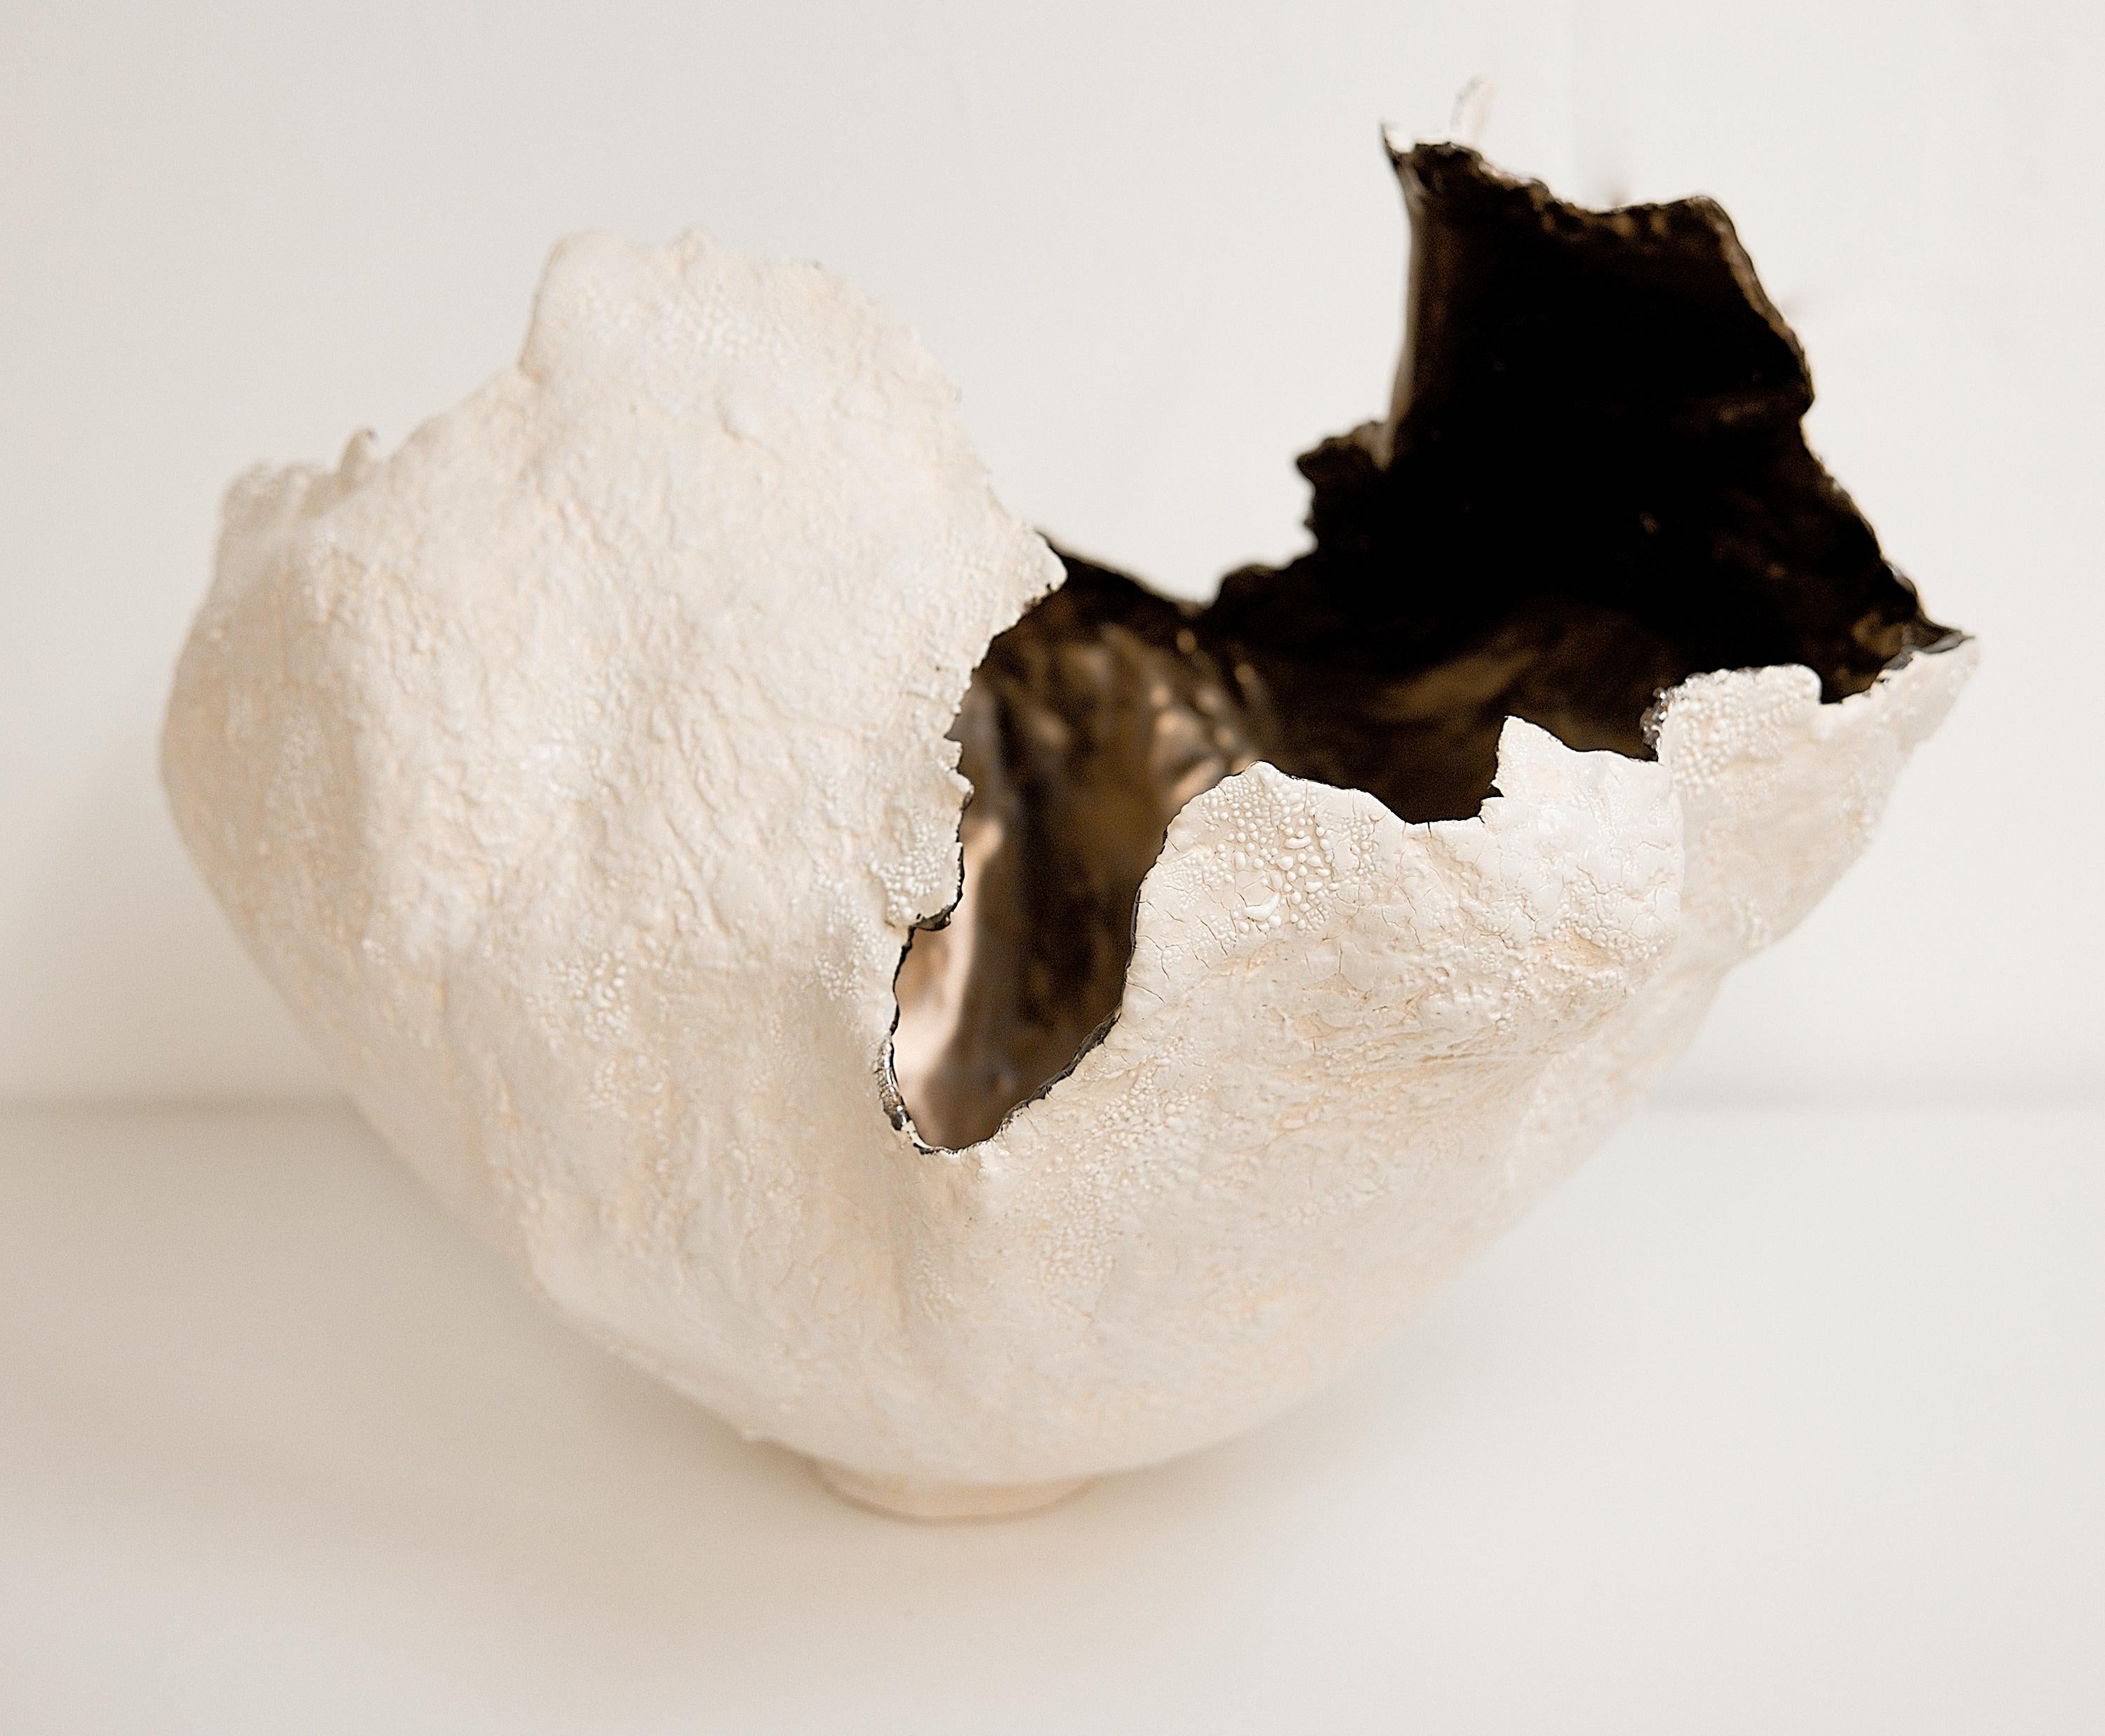 Bring a touch of modern style to your home with our Drift Torn Edge Vases
one of kind 
this White open  jar with Textured drips and lava glaze
one of a kind
saturated GOLD inside. one of a kind 

., each striking vase features a unique, moon-like